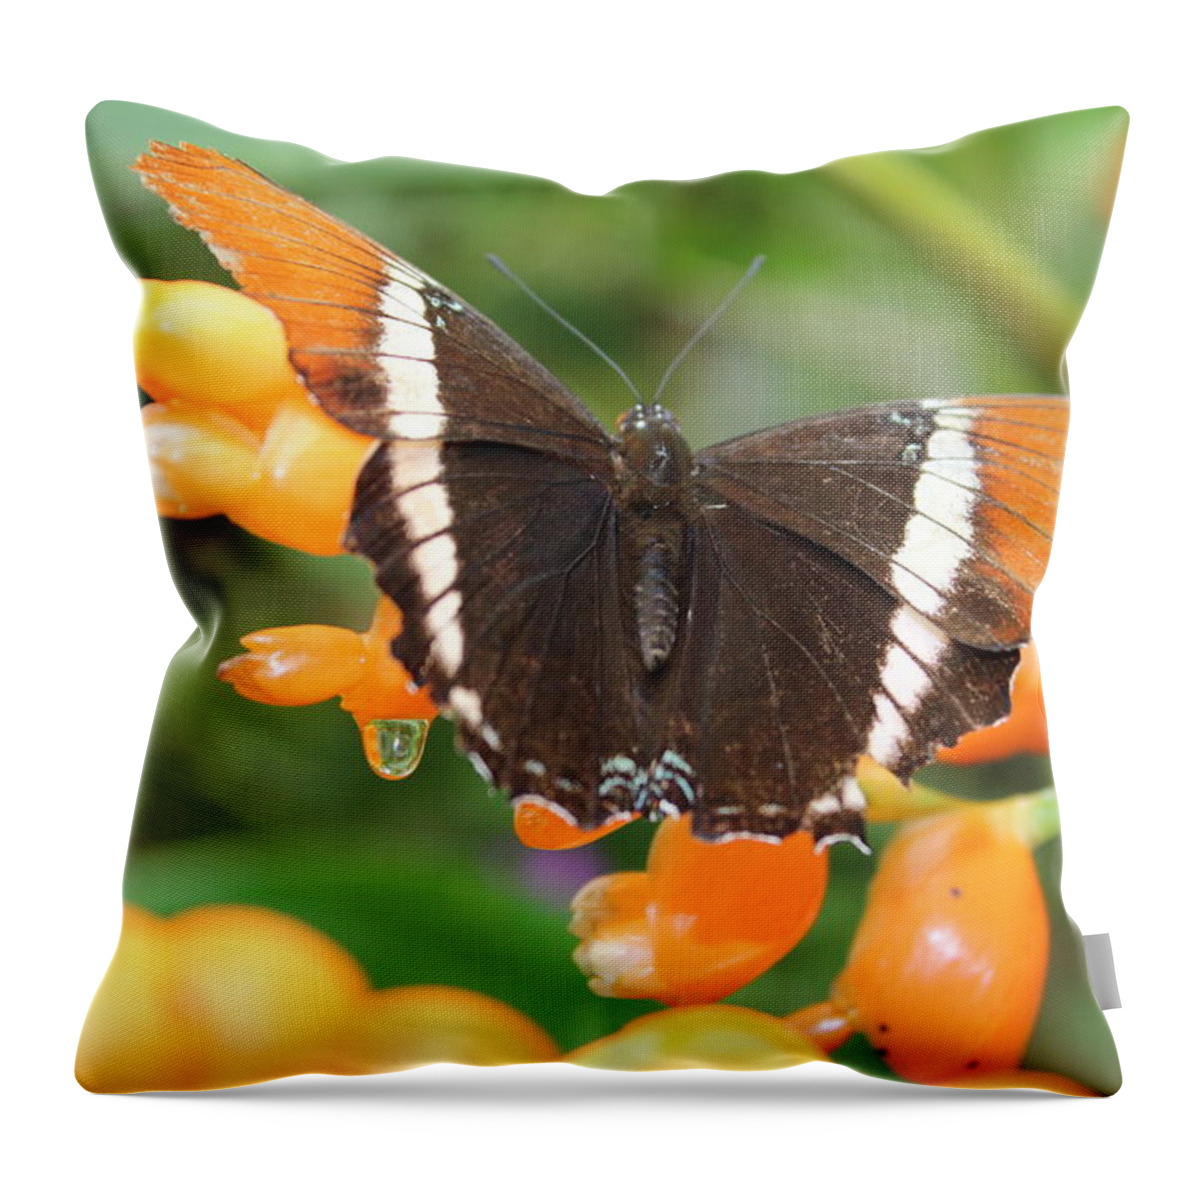 Butterfly Throw Pillow featuring the photograph Orange Butterfly by Samantha Delory